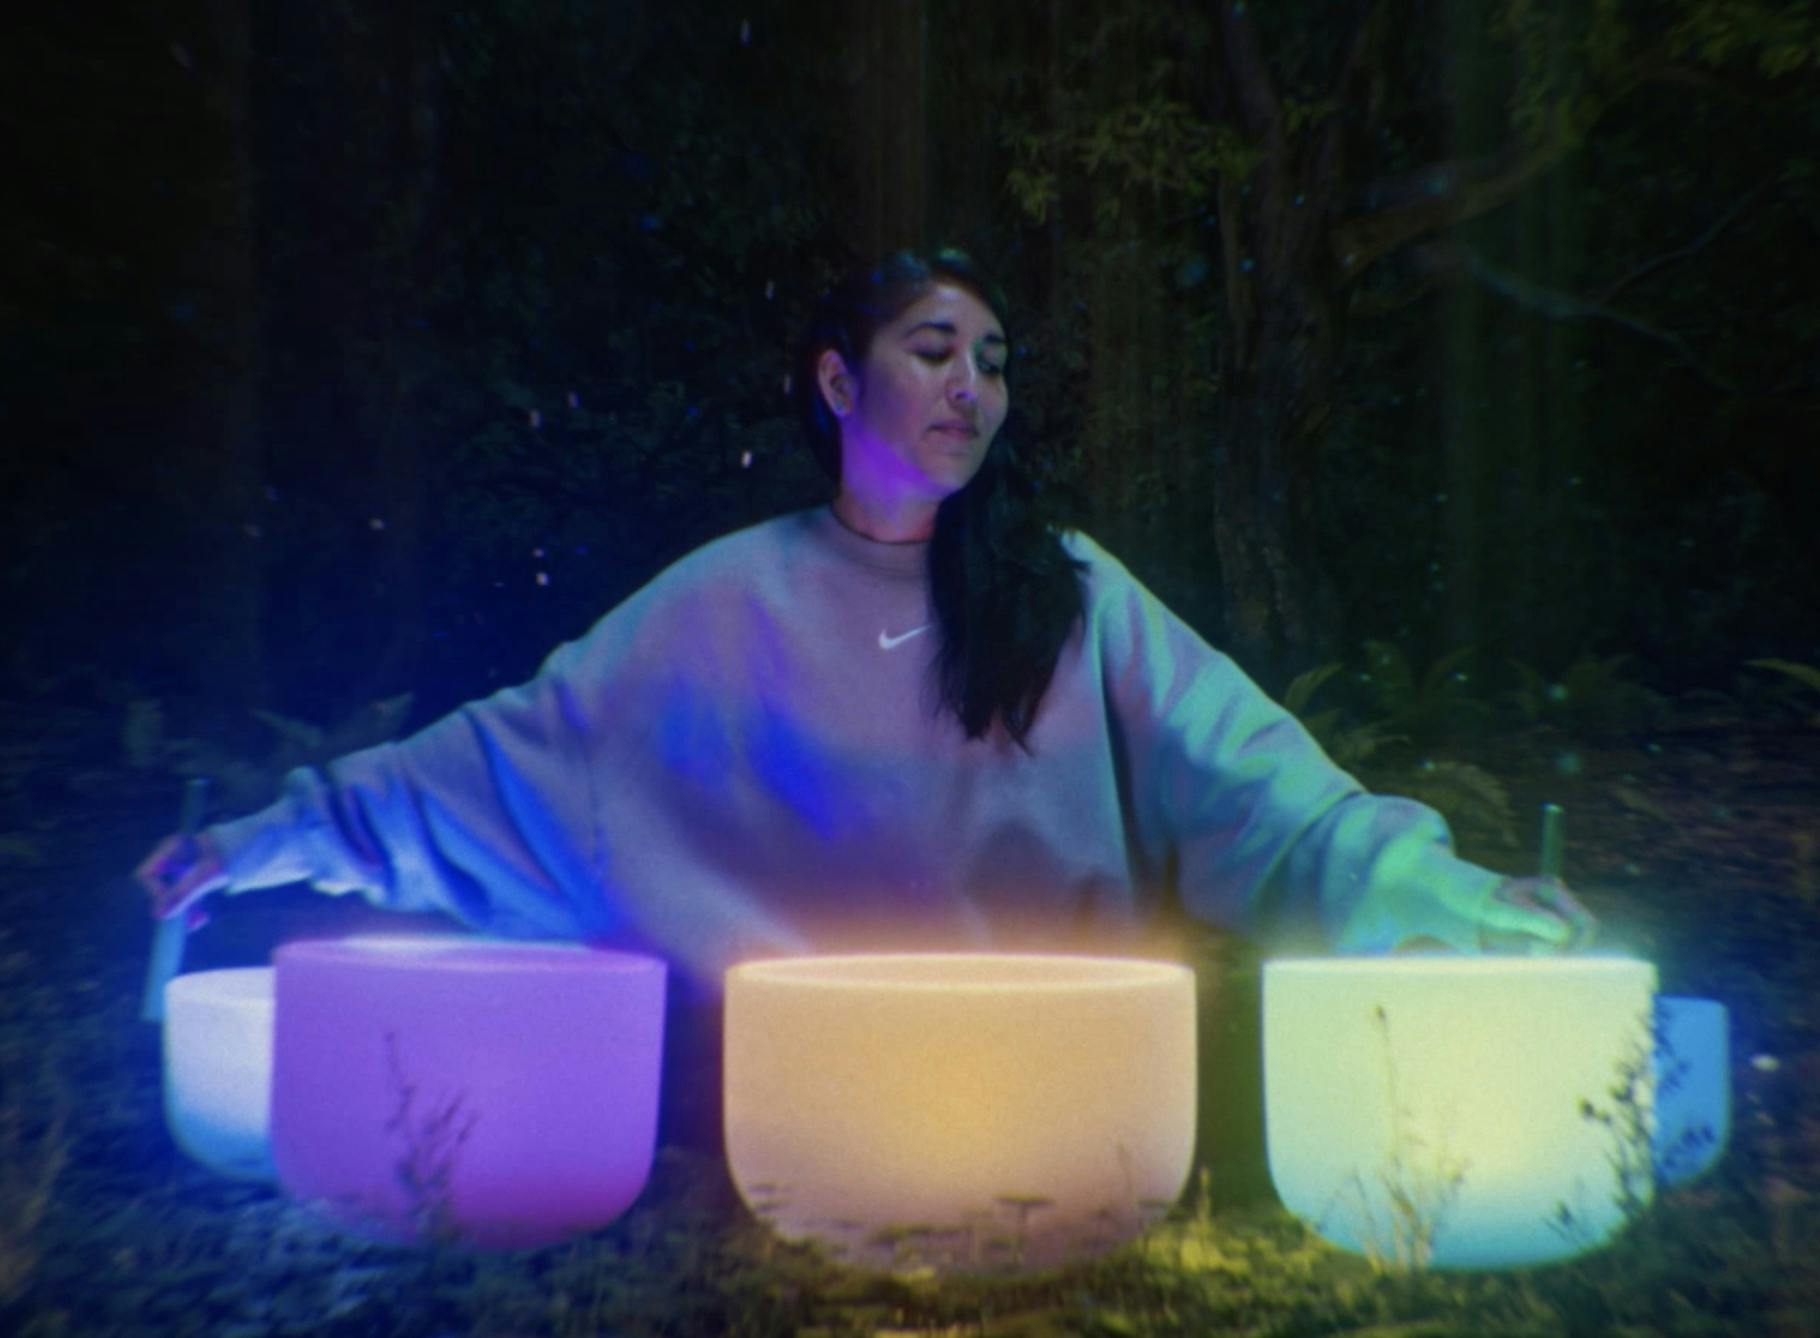 Woman sitting in front of glowing pots